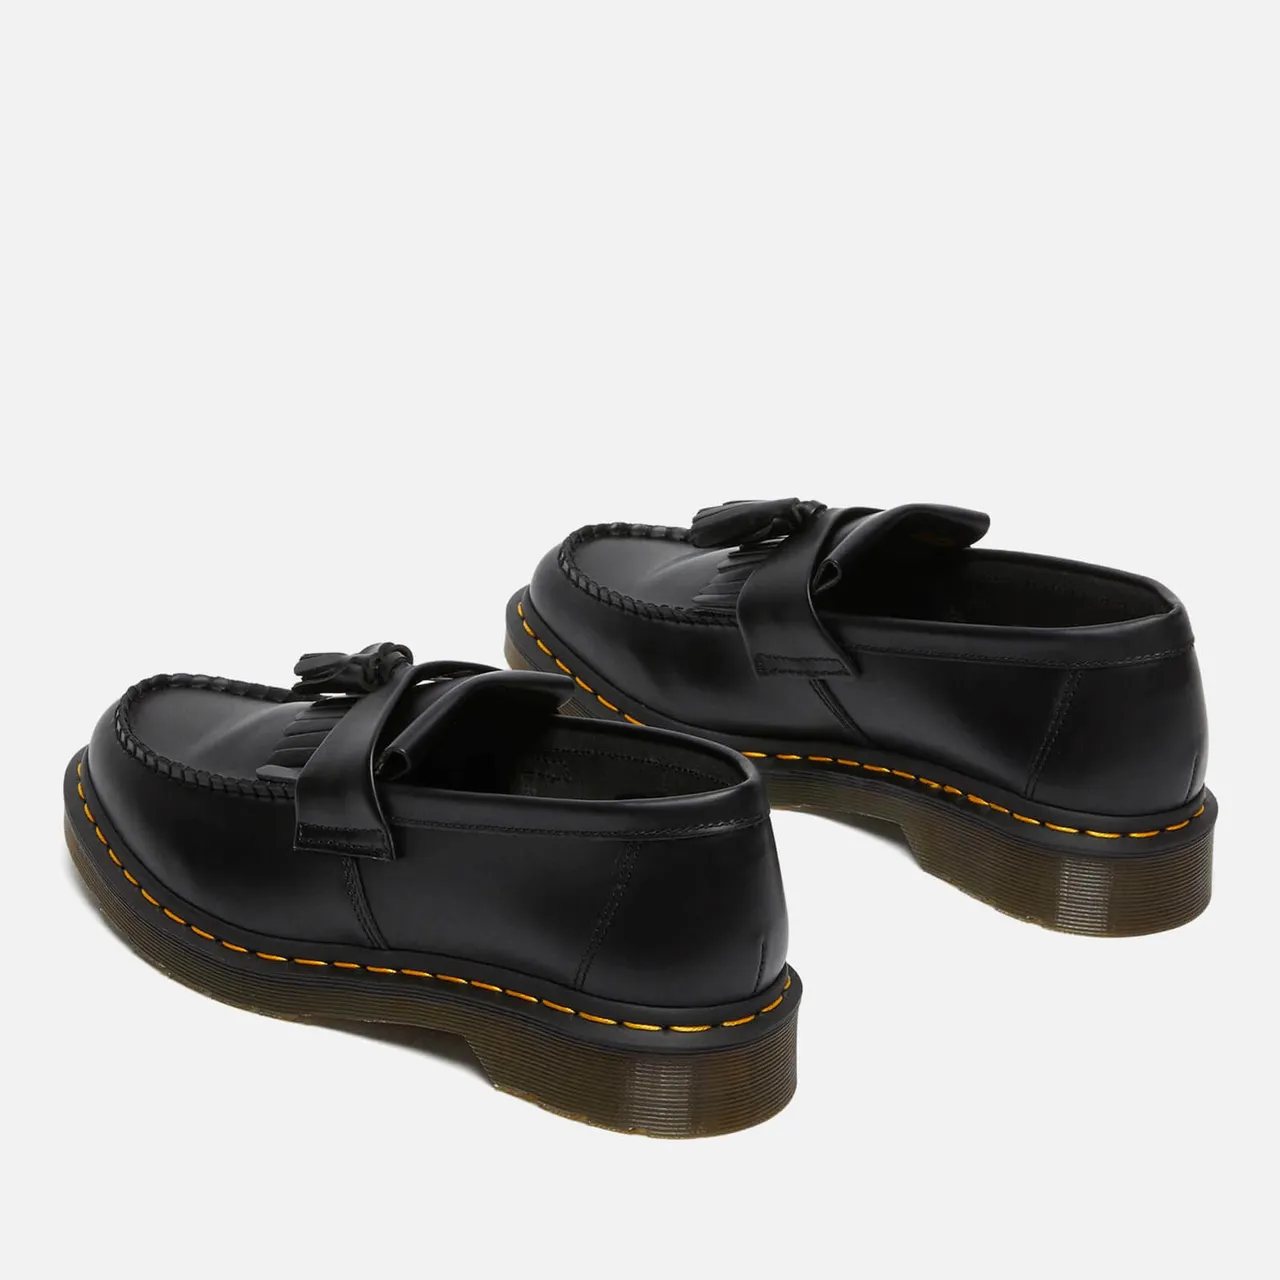 Dr. Martens Adrian Leather Loafers - UK